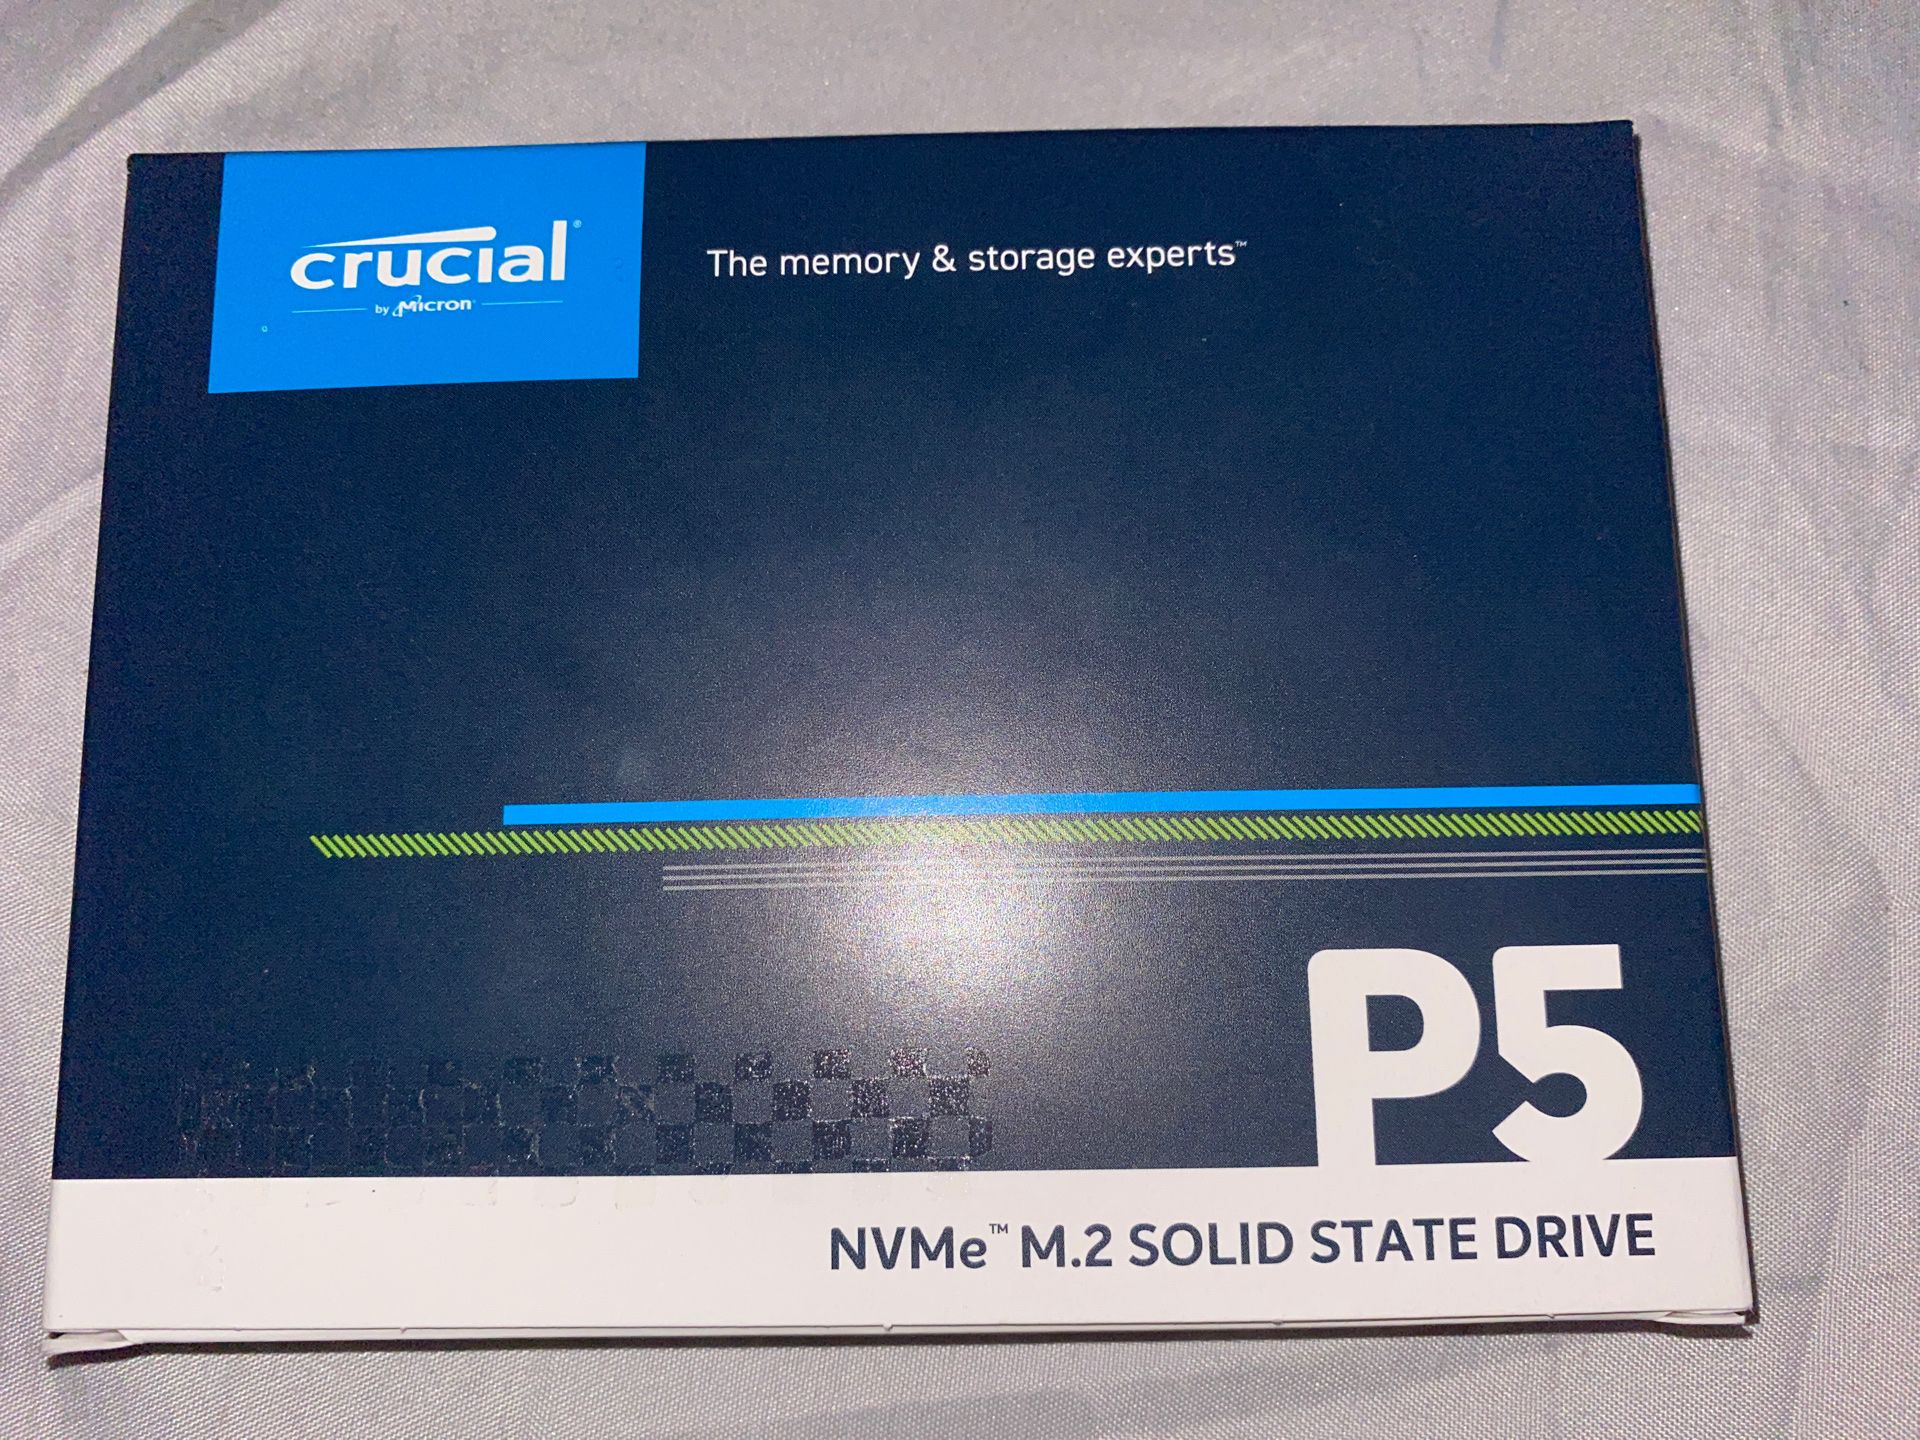 NVMe M.2 SOLID STATE DRIVE